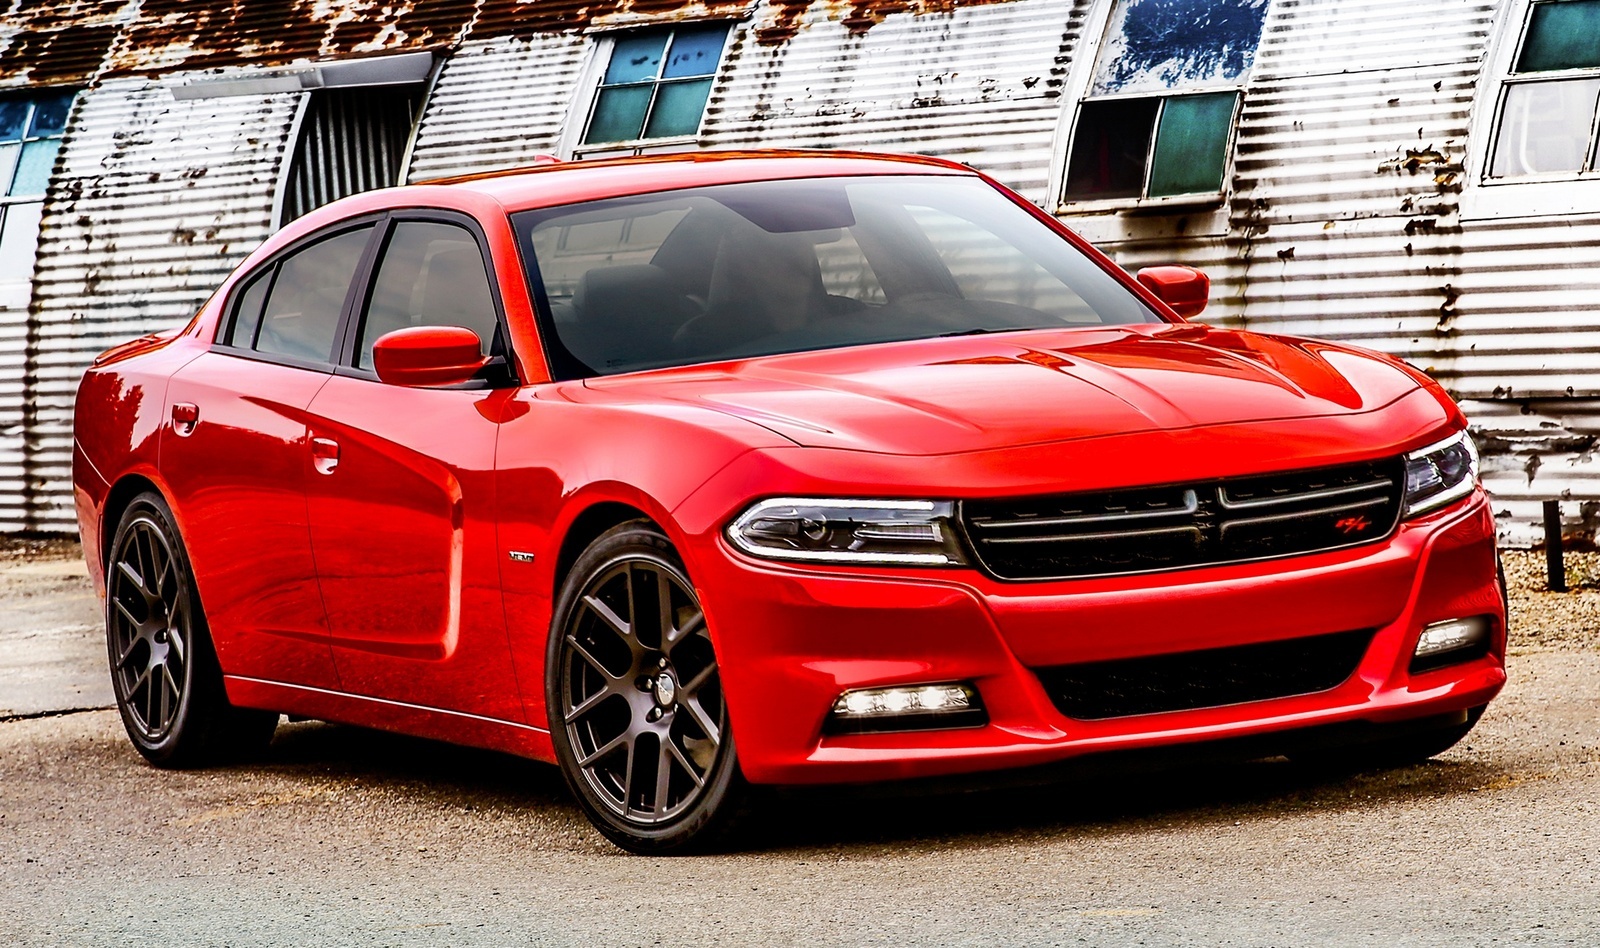 2015 Dodge Charger: Prices, Reviews & Pictures - CarGurus